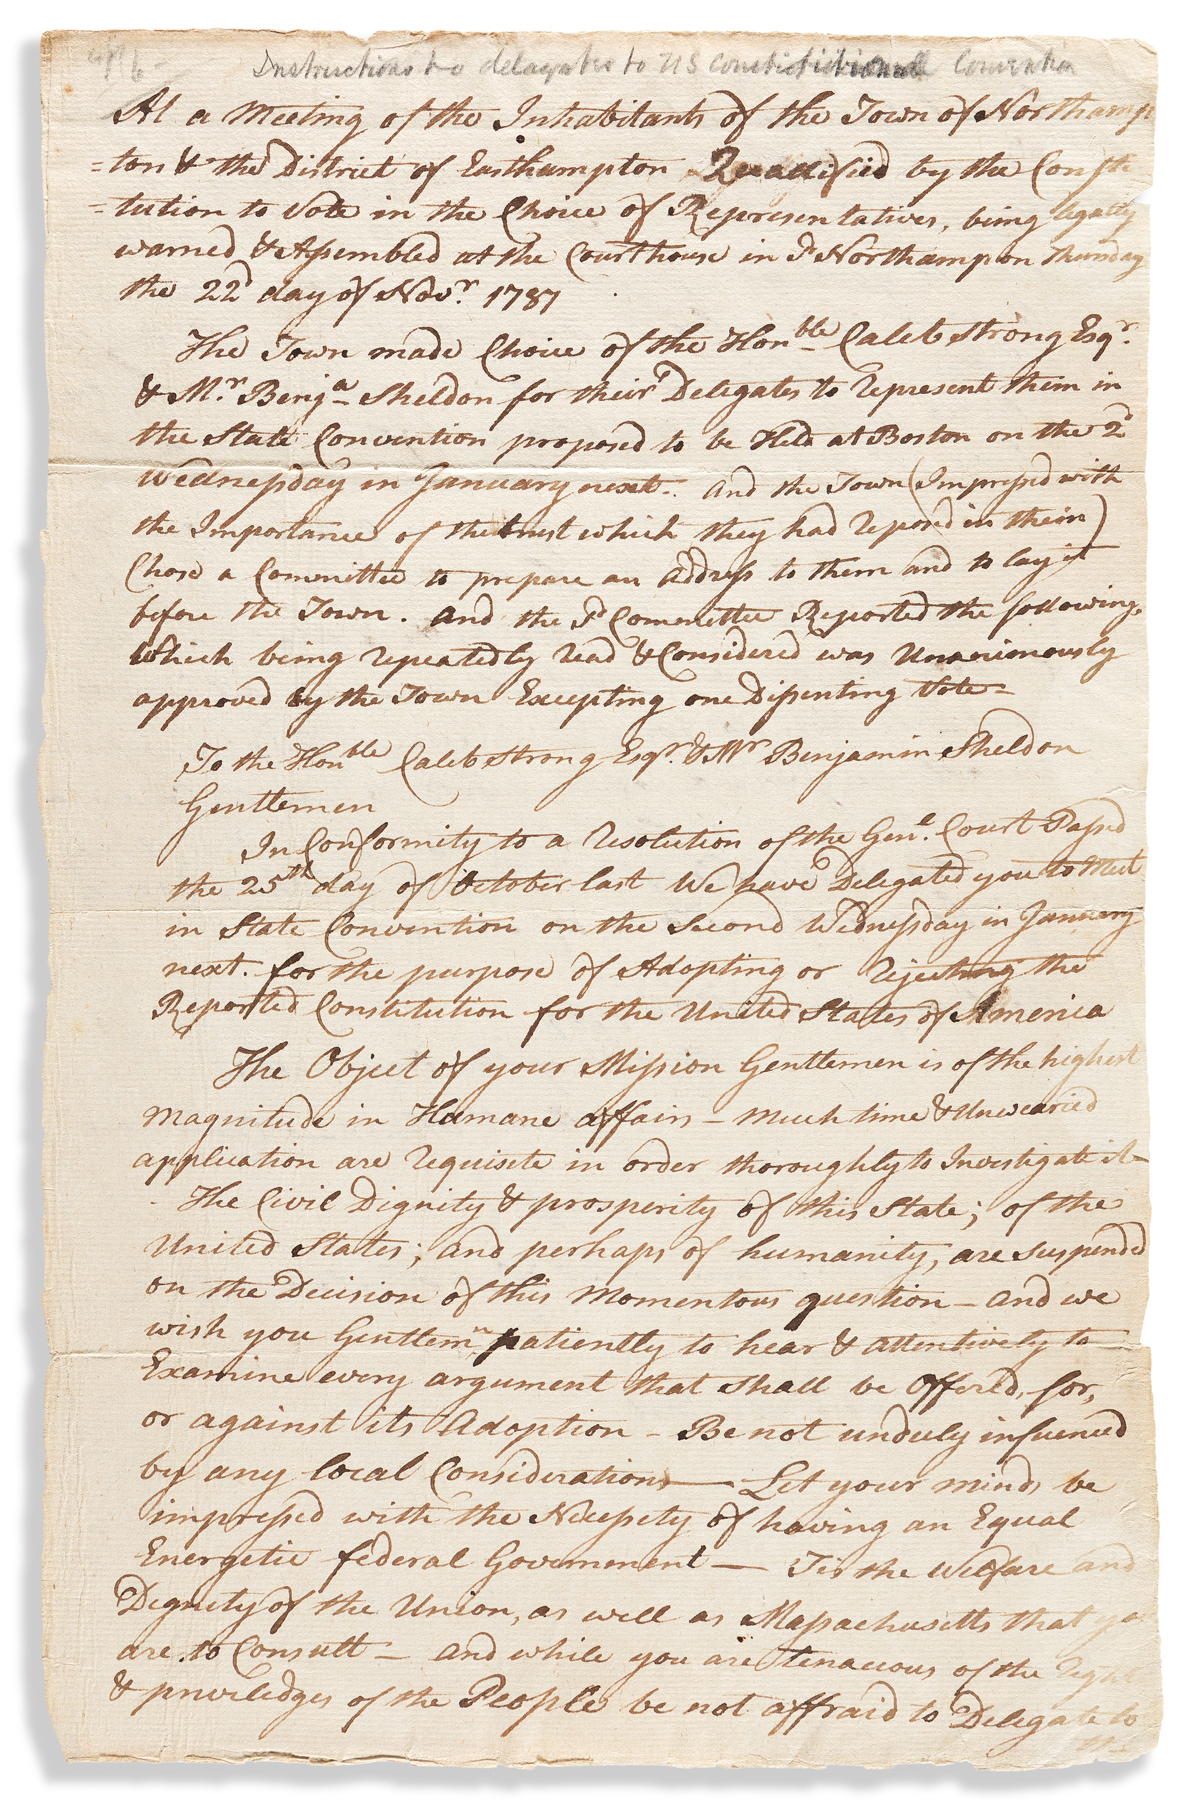 (CONSTITUTION.) Samuel Henshaw. Inspirational letter to two Massachusetts delegates to U.S. Constitutional Convention.